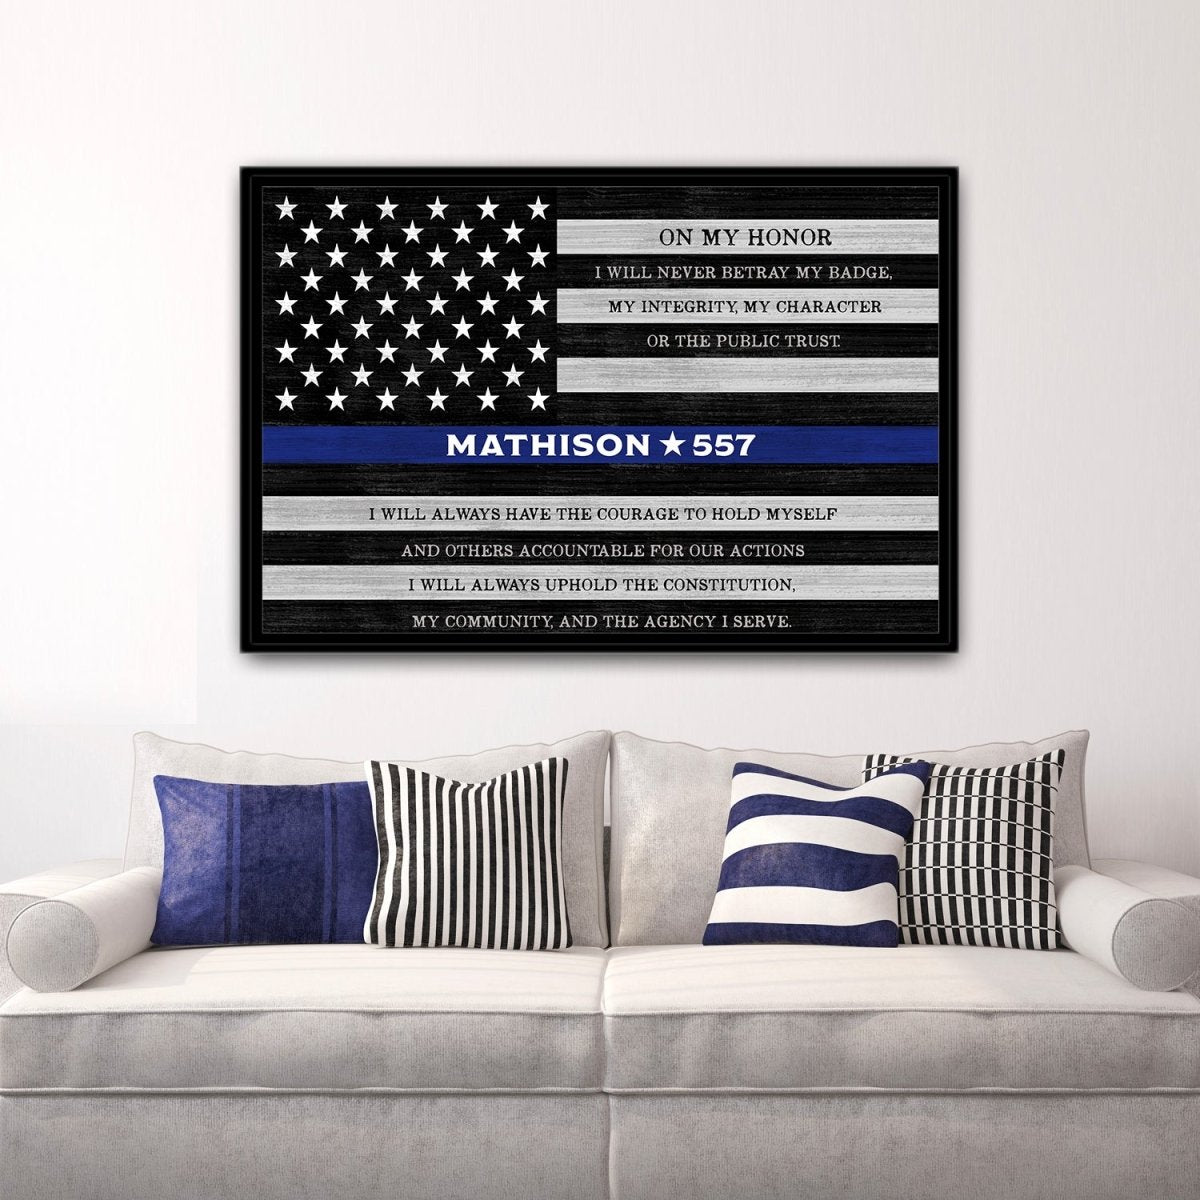 Police Officer Sign Personalized With Name and Oath In Living Room Above Couch - Pretty Perfect Studio